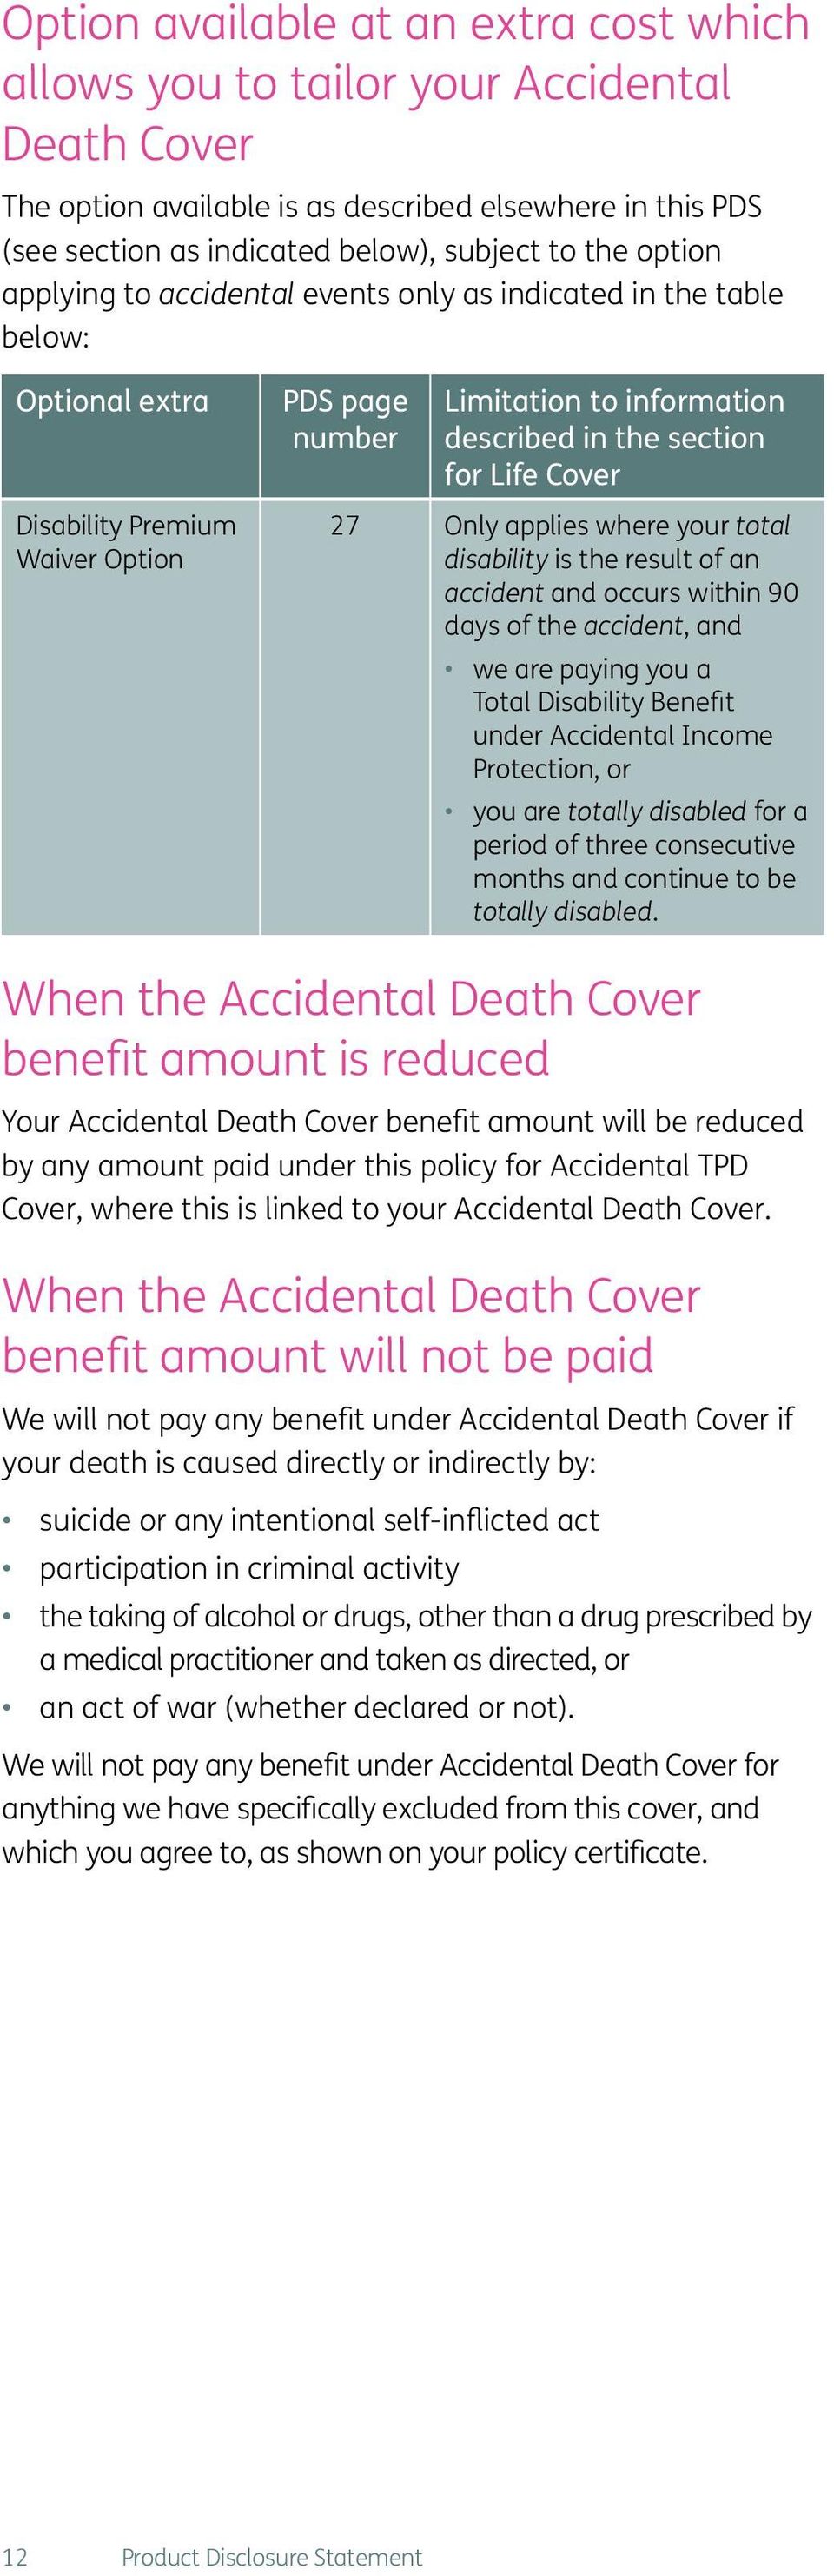 Cover 27 Only applies where your total disability is the result of an accident and occurs within 90 days of the accident, and we are paying you a Total Disability Benefit under Accidental Income